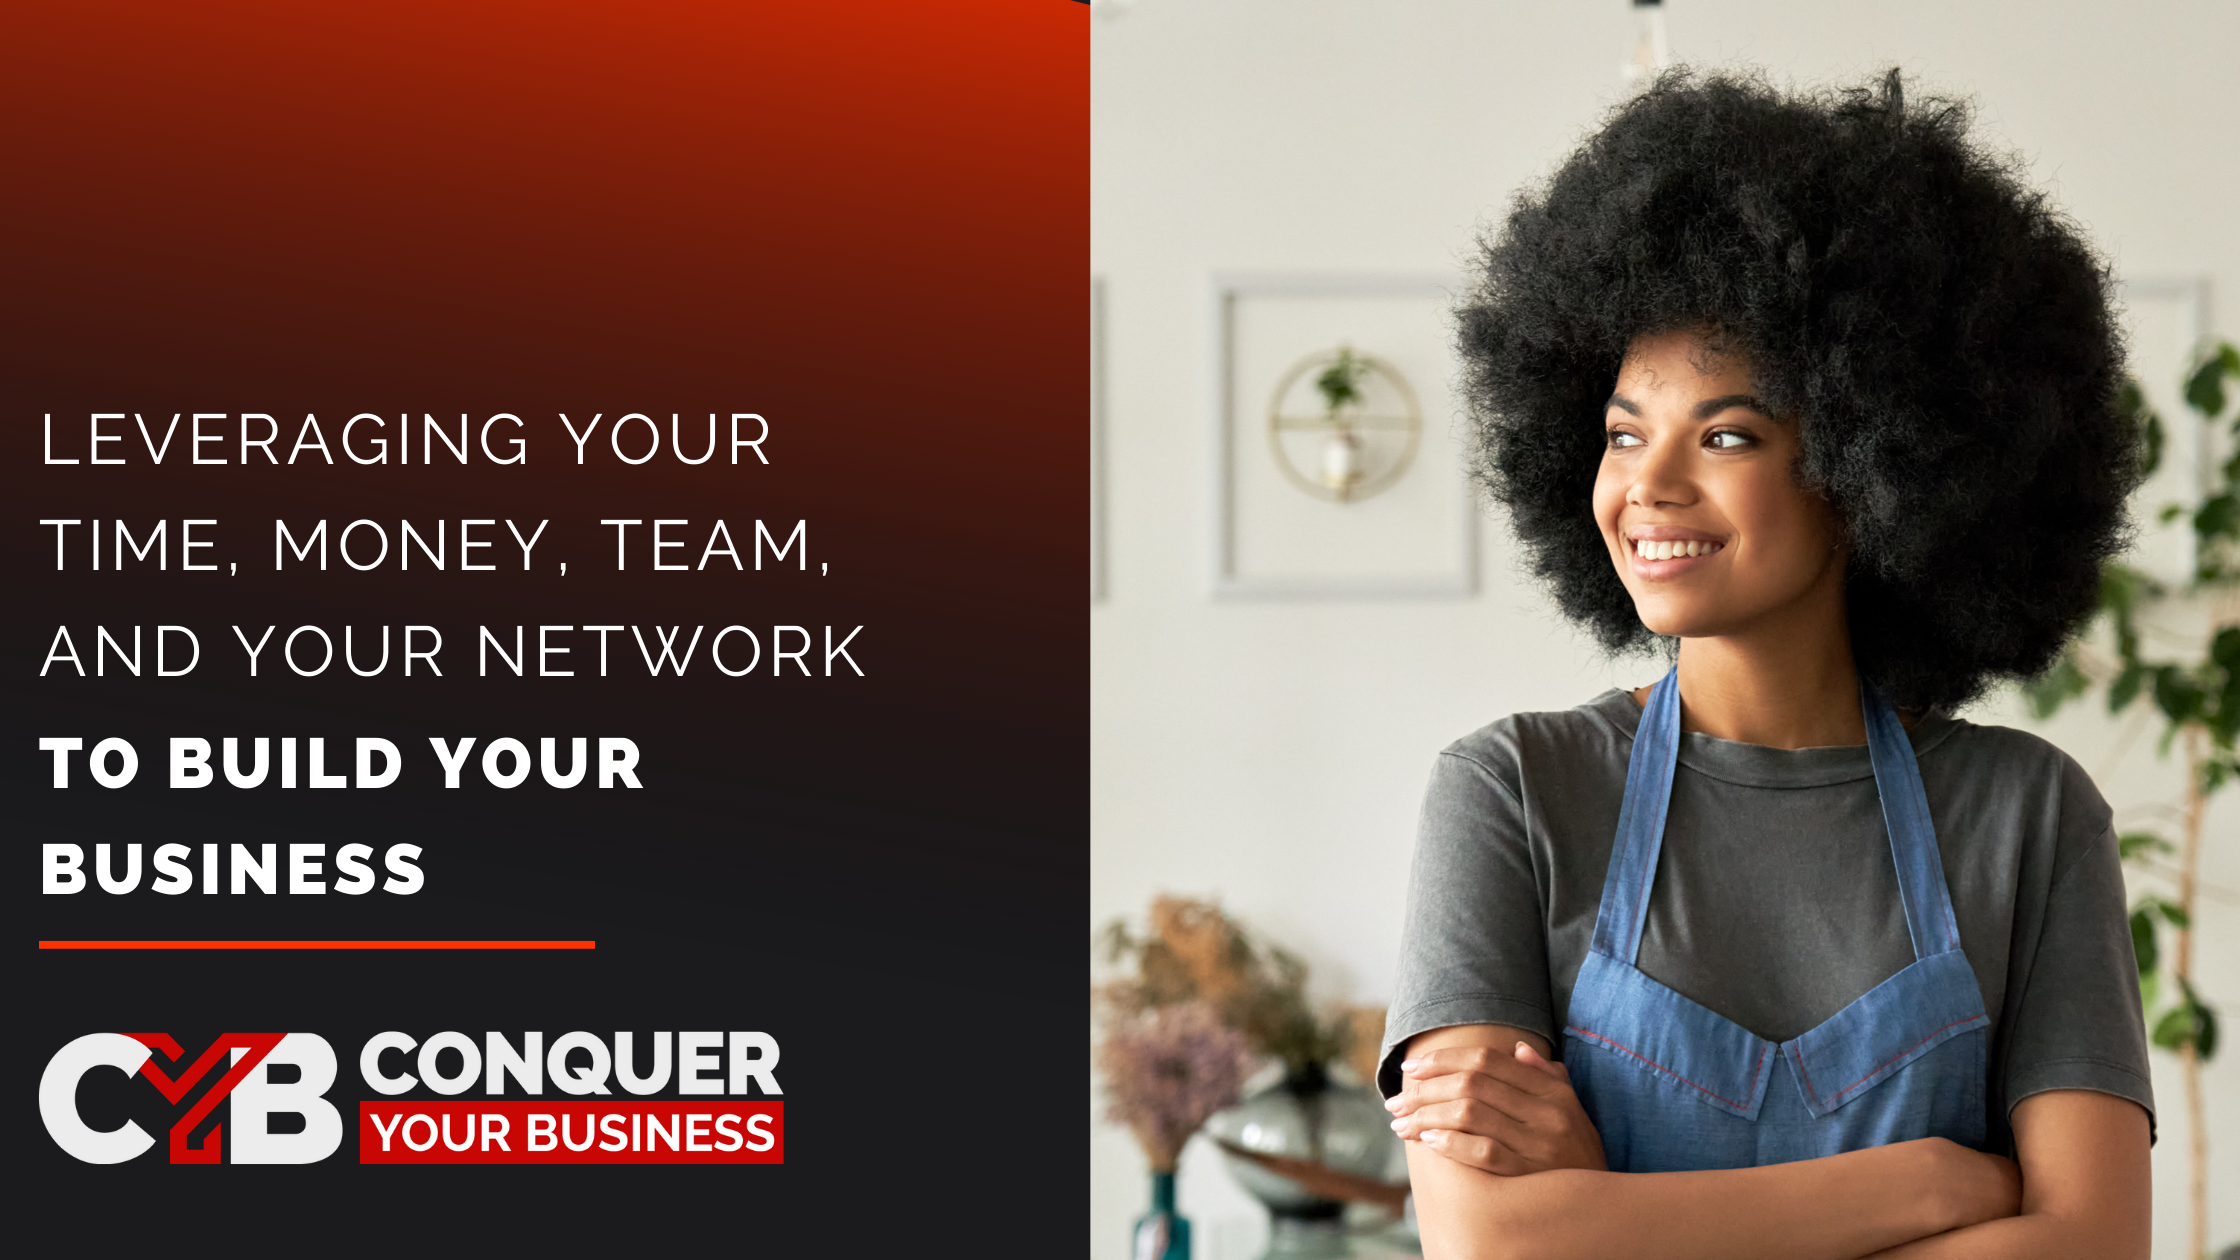 Blog header image with the title Leveraging Your Time, Money, Team, And Your Network To Build Your Business and a successful business owner.